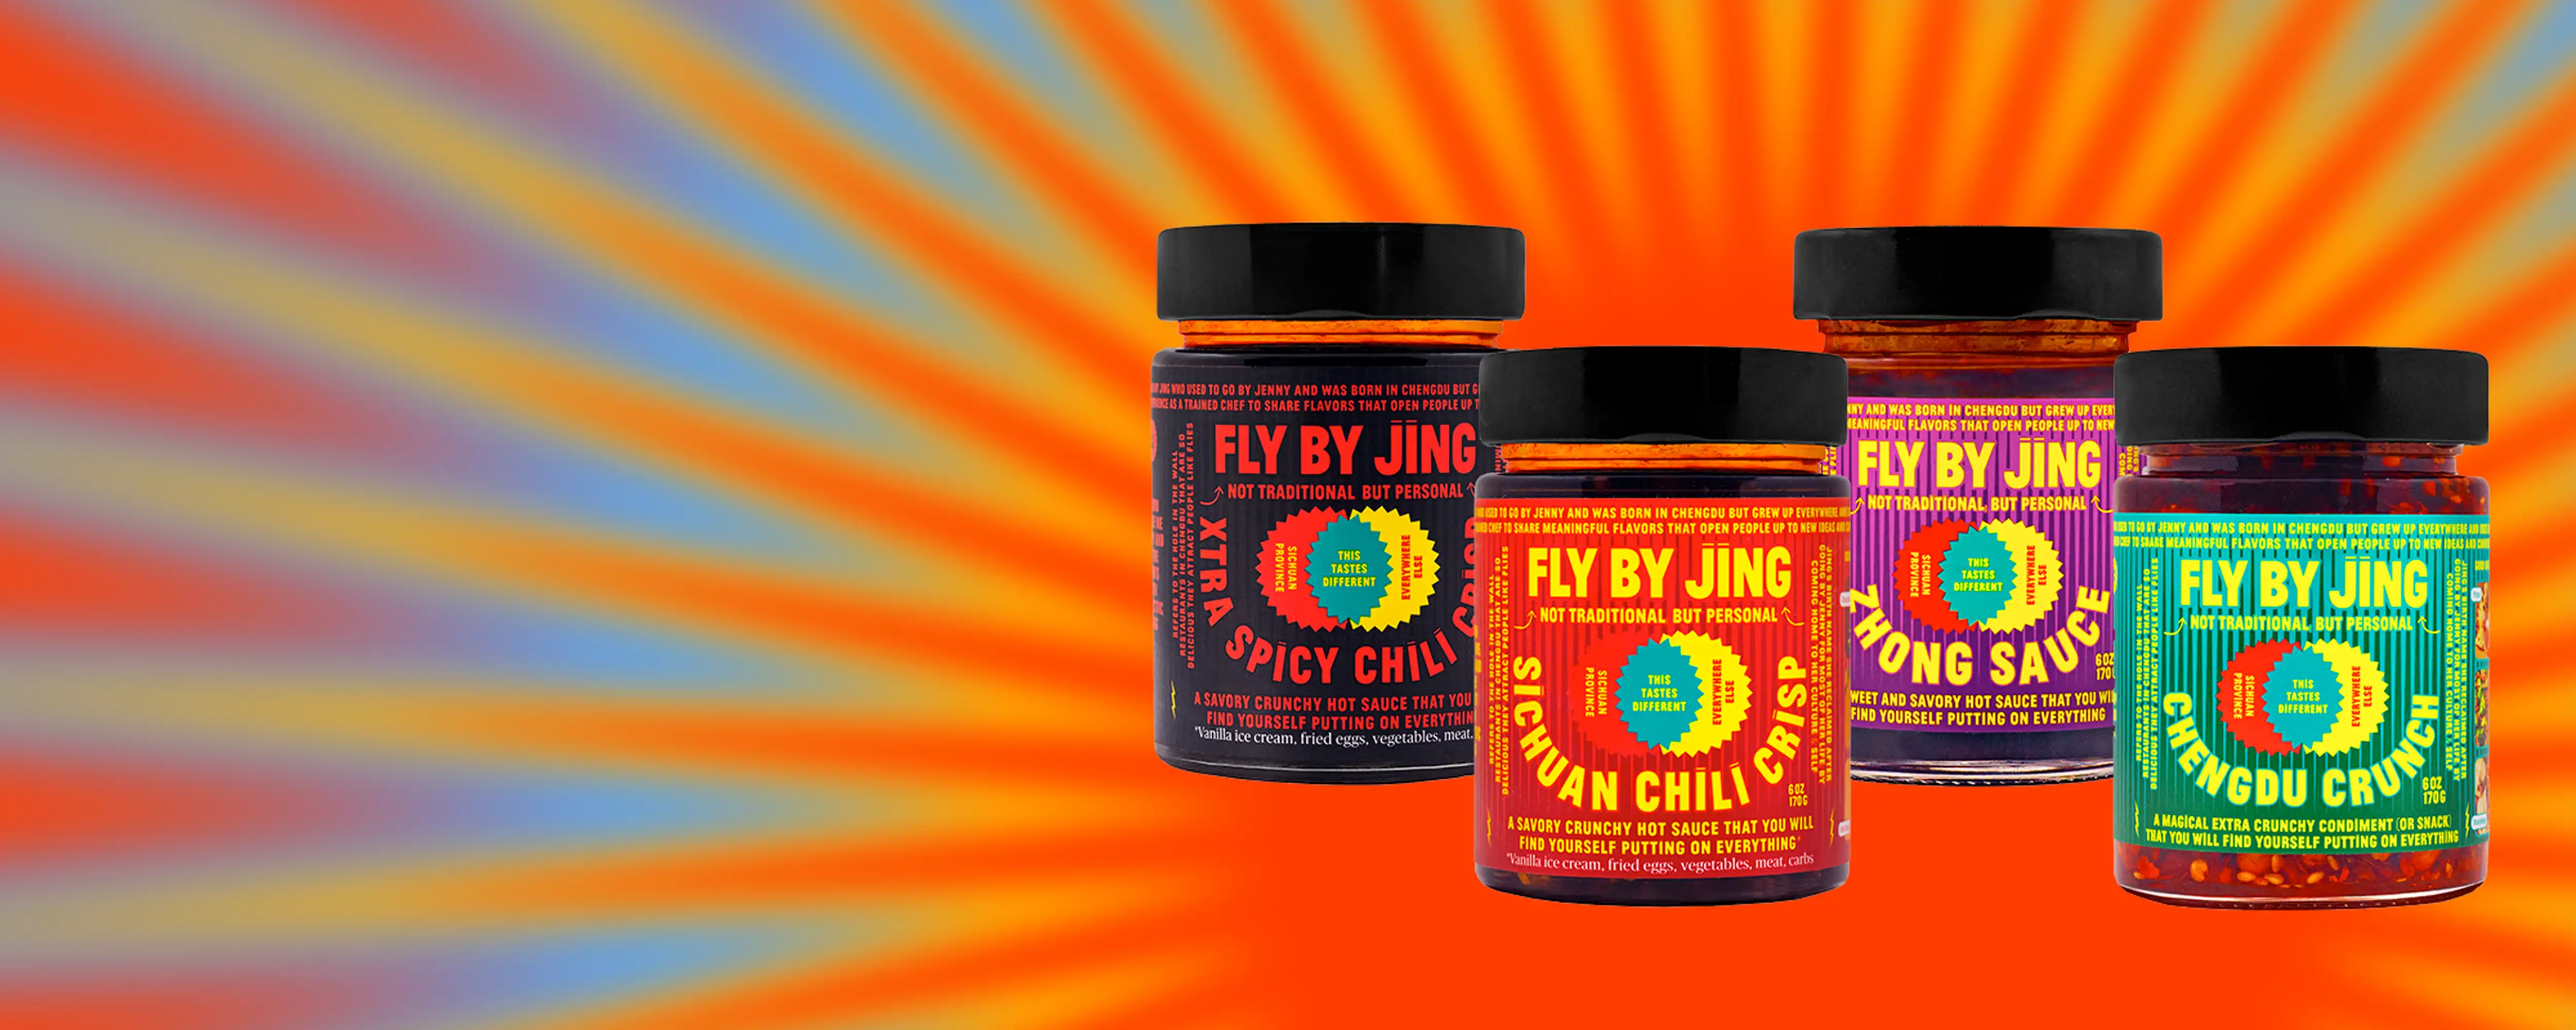 Fly By Jing sauce jars with tie dye effect in the background